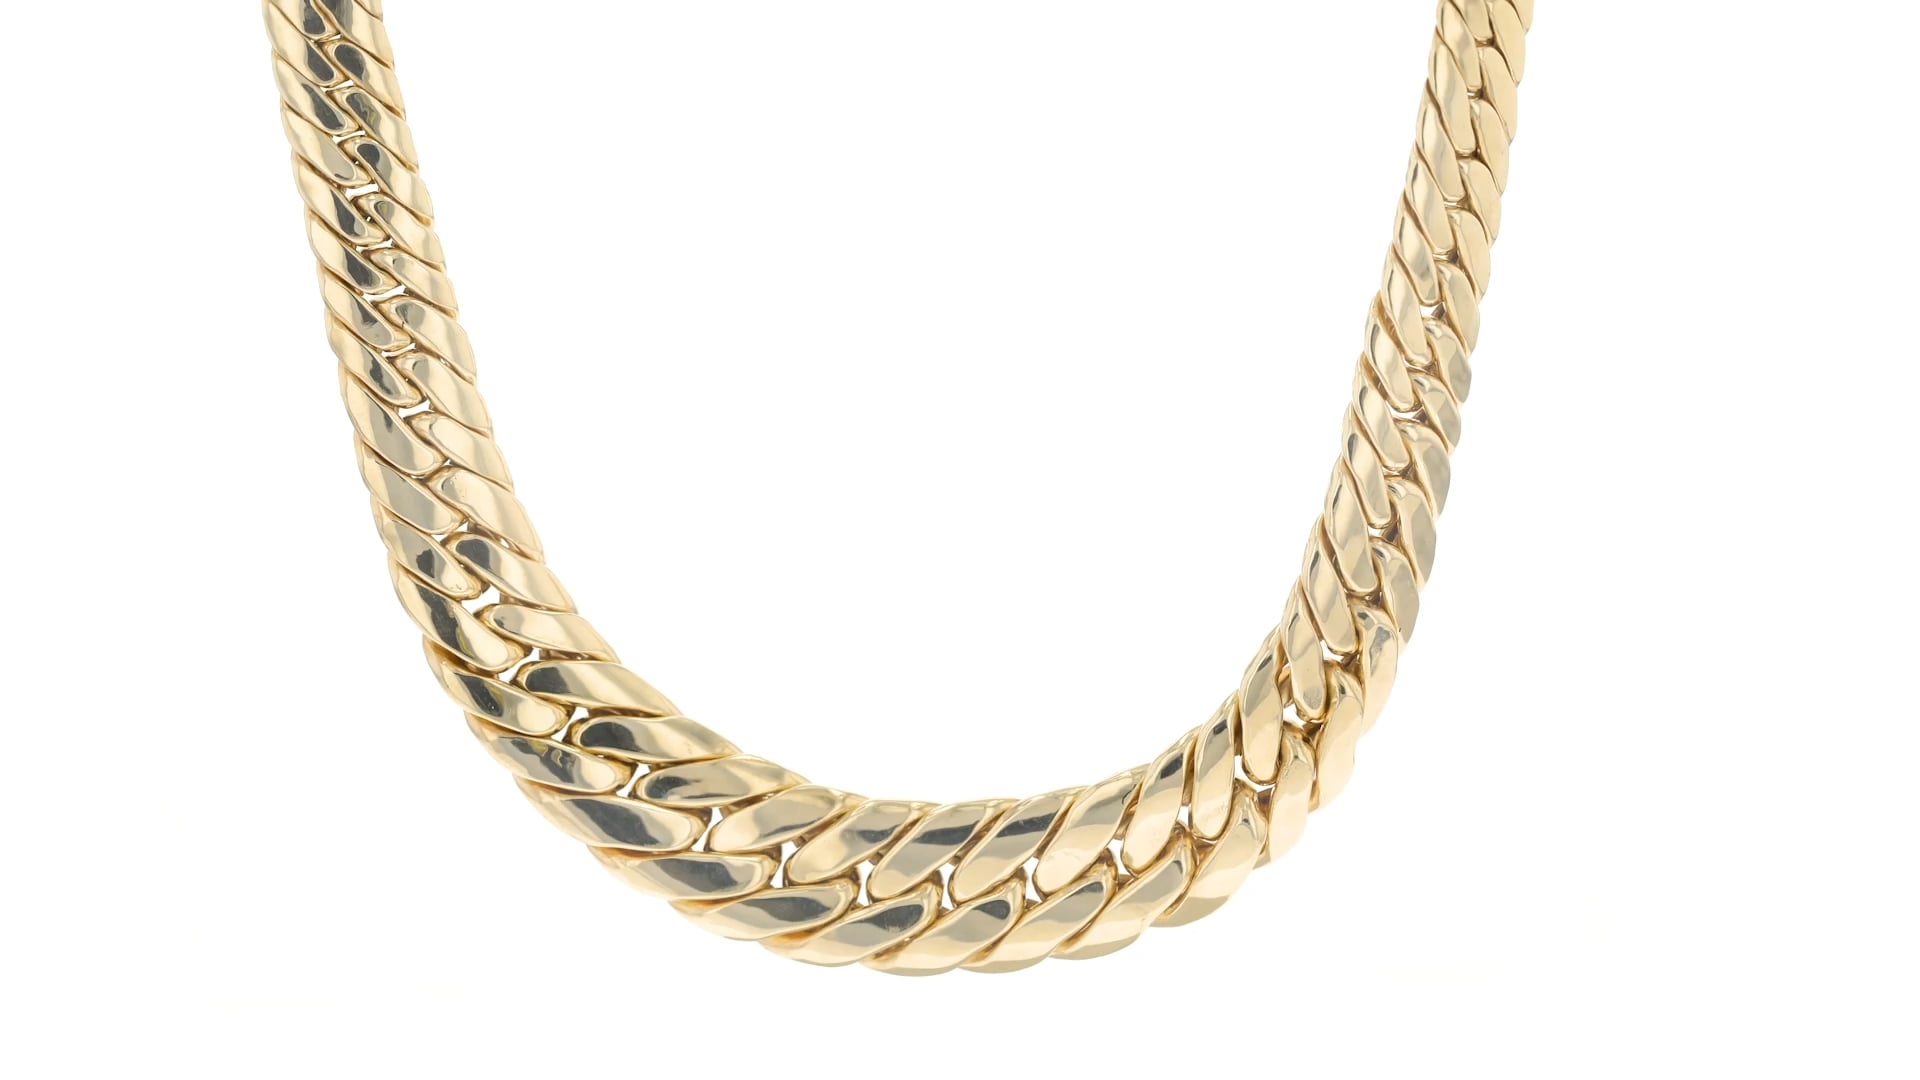 18kt Yellow Gold Over Sterling Silver Graduated Flat Cuban-Link Necklace on Vimeo